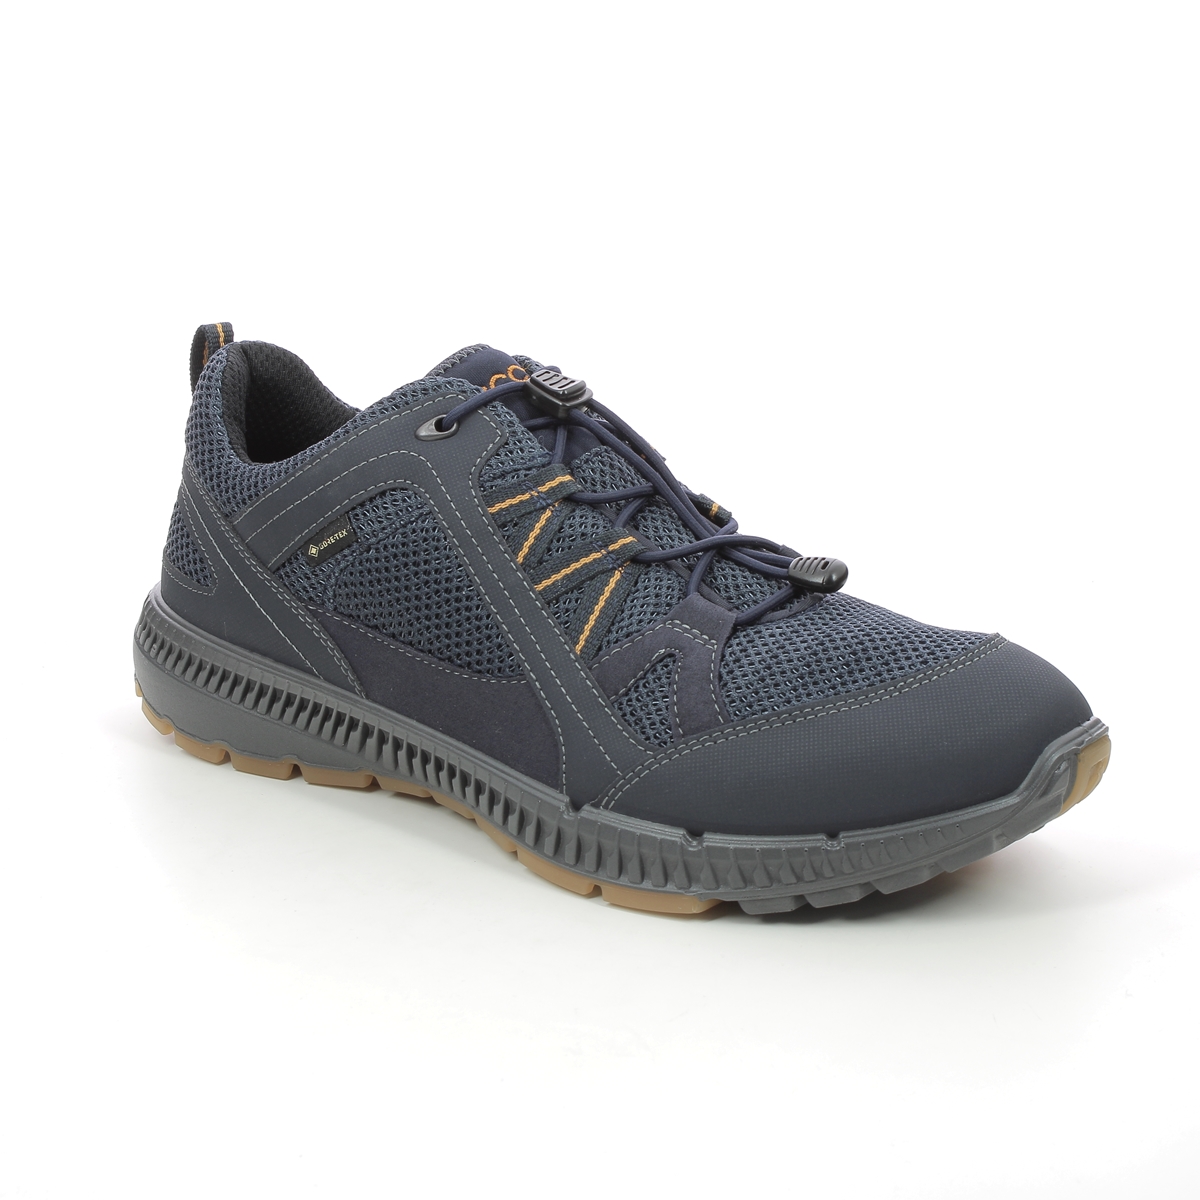 Ecco Terracruise Gtx Navy Mens Trainers 843064-51241 In Size 44 In Plain Navy